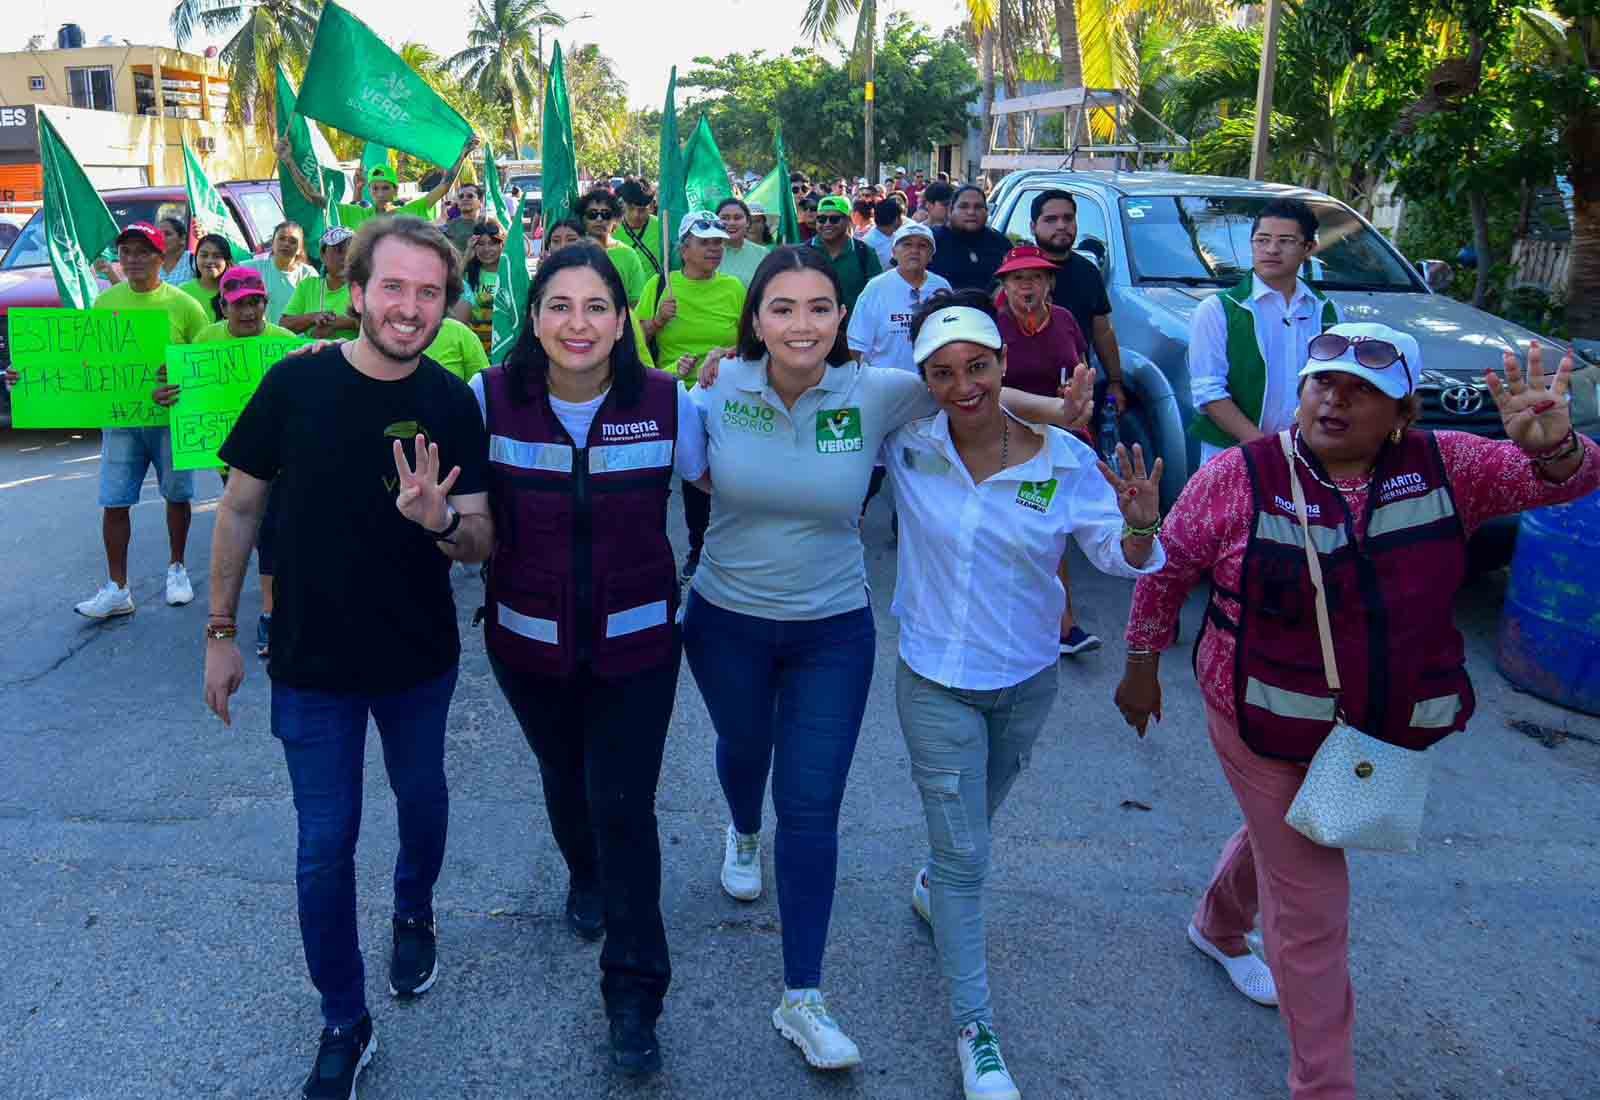 A group of individuals participating in a political rally, with some waving to the camera and others holding banners and green flags, conveying a sense of community activism and engagement.